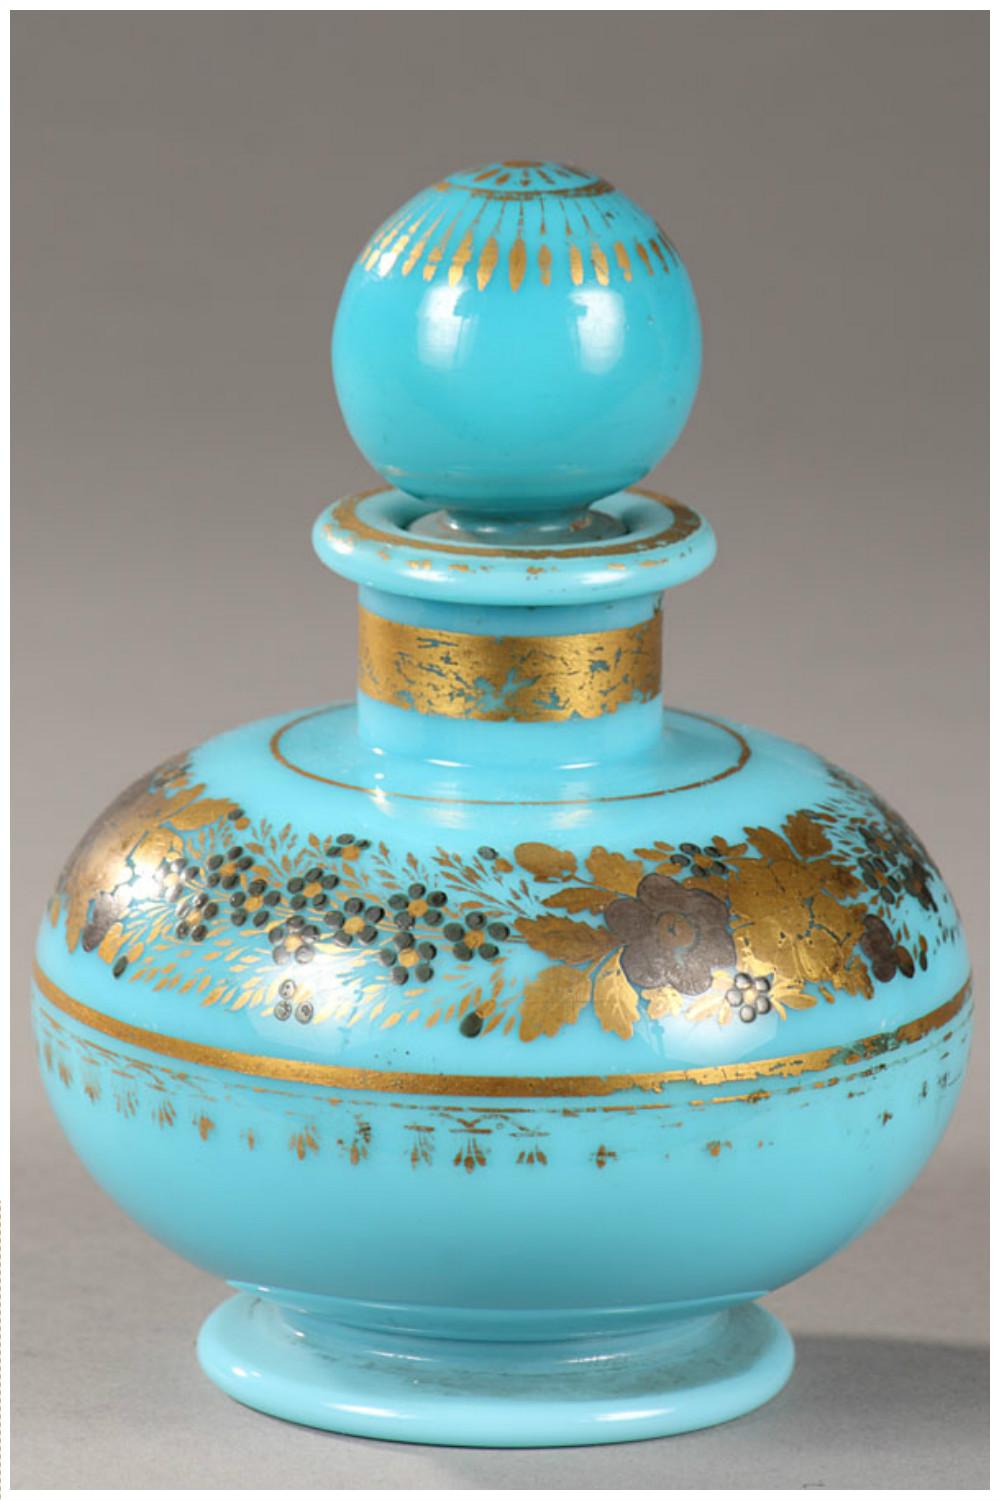 Charles X Set of Early 19th Century Perfume Bottle in Turquoise Opaline  For Sale